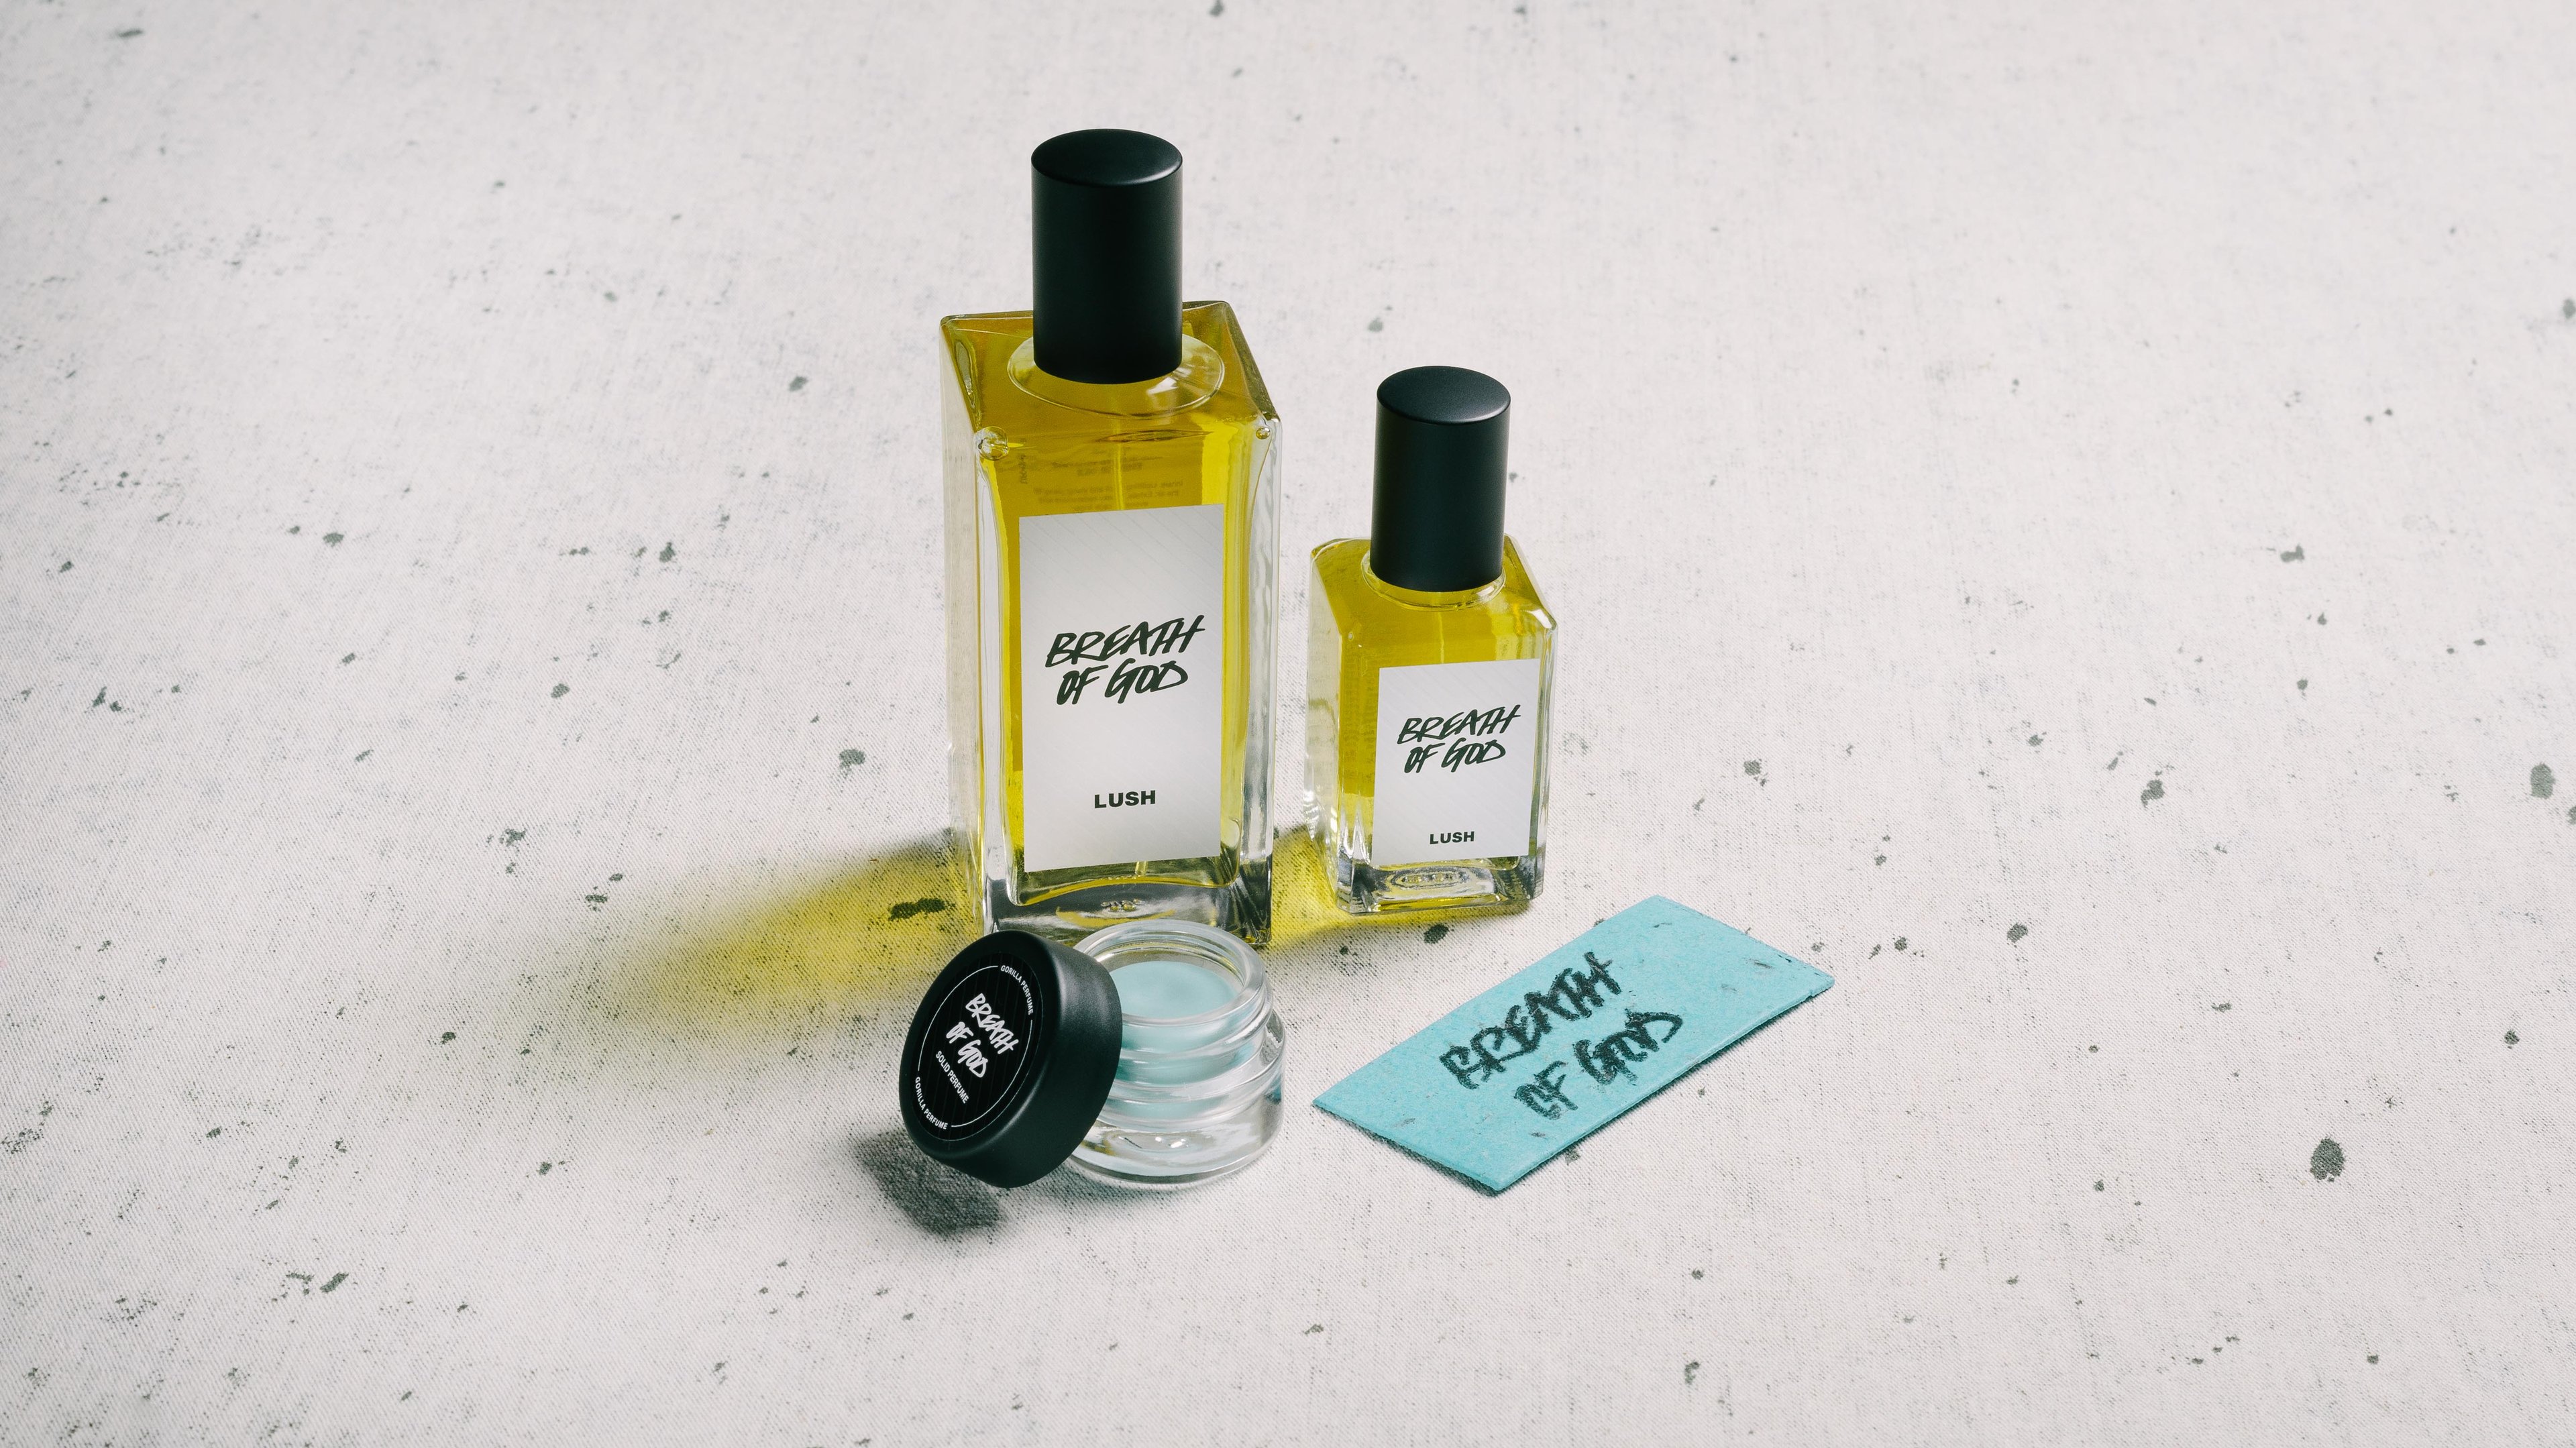 The whole Breath of God fragrance collection is displayed on a white surface, flecked with grey.